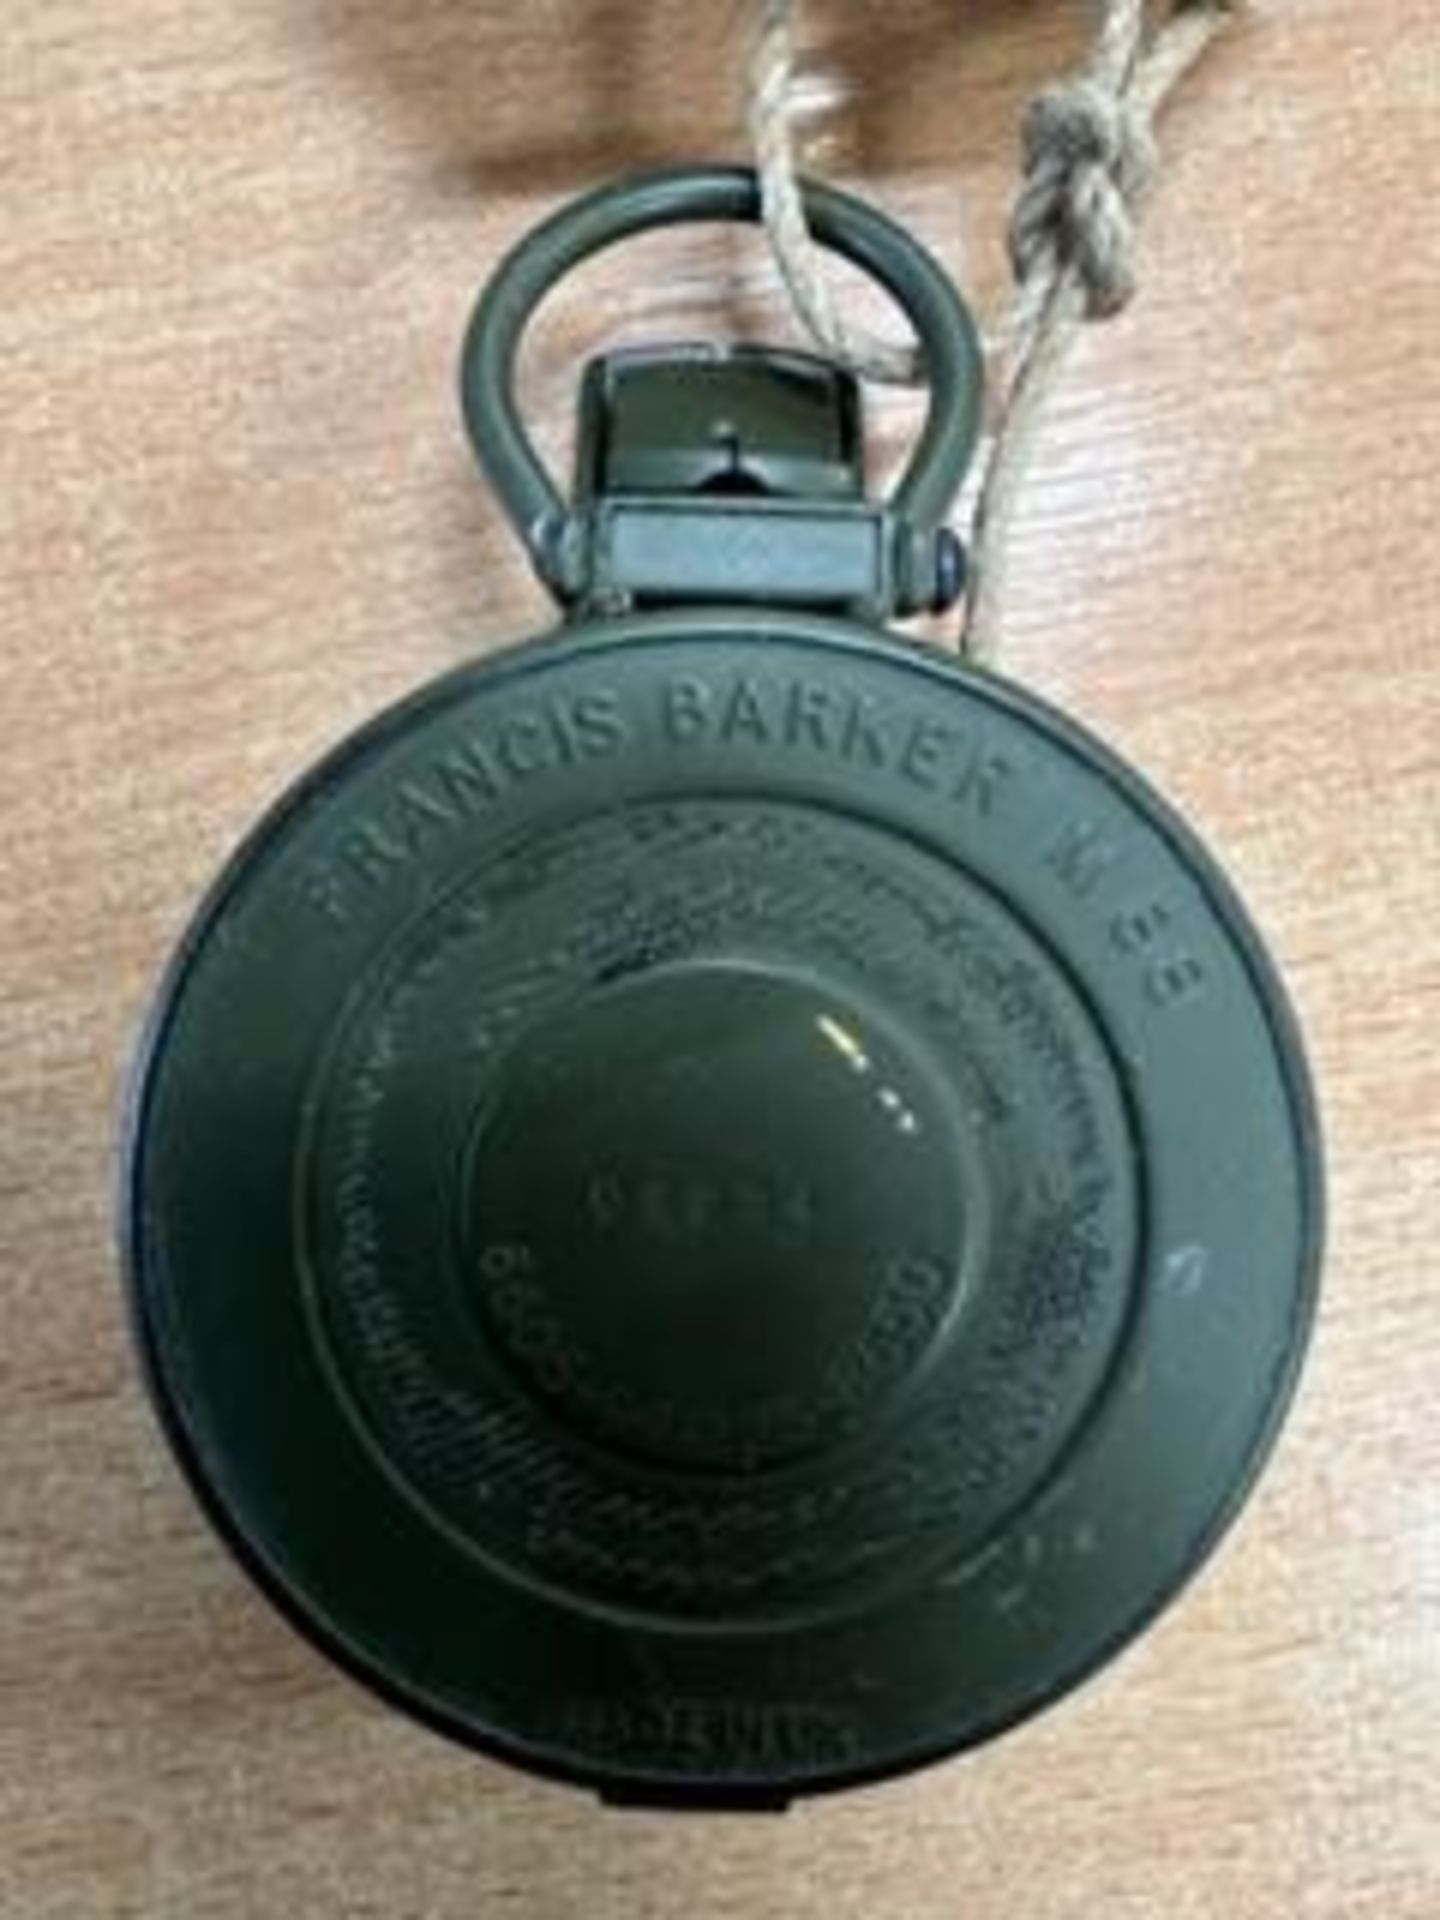 FRANCIS BAKER M88 BRITISH ARMY PRISMATIC COMPASS IN MILS NATO MARKS - Image 6 of 7